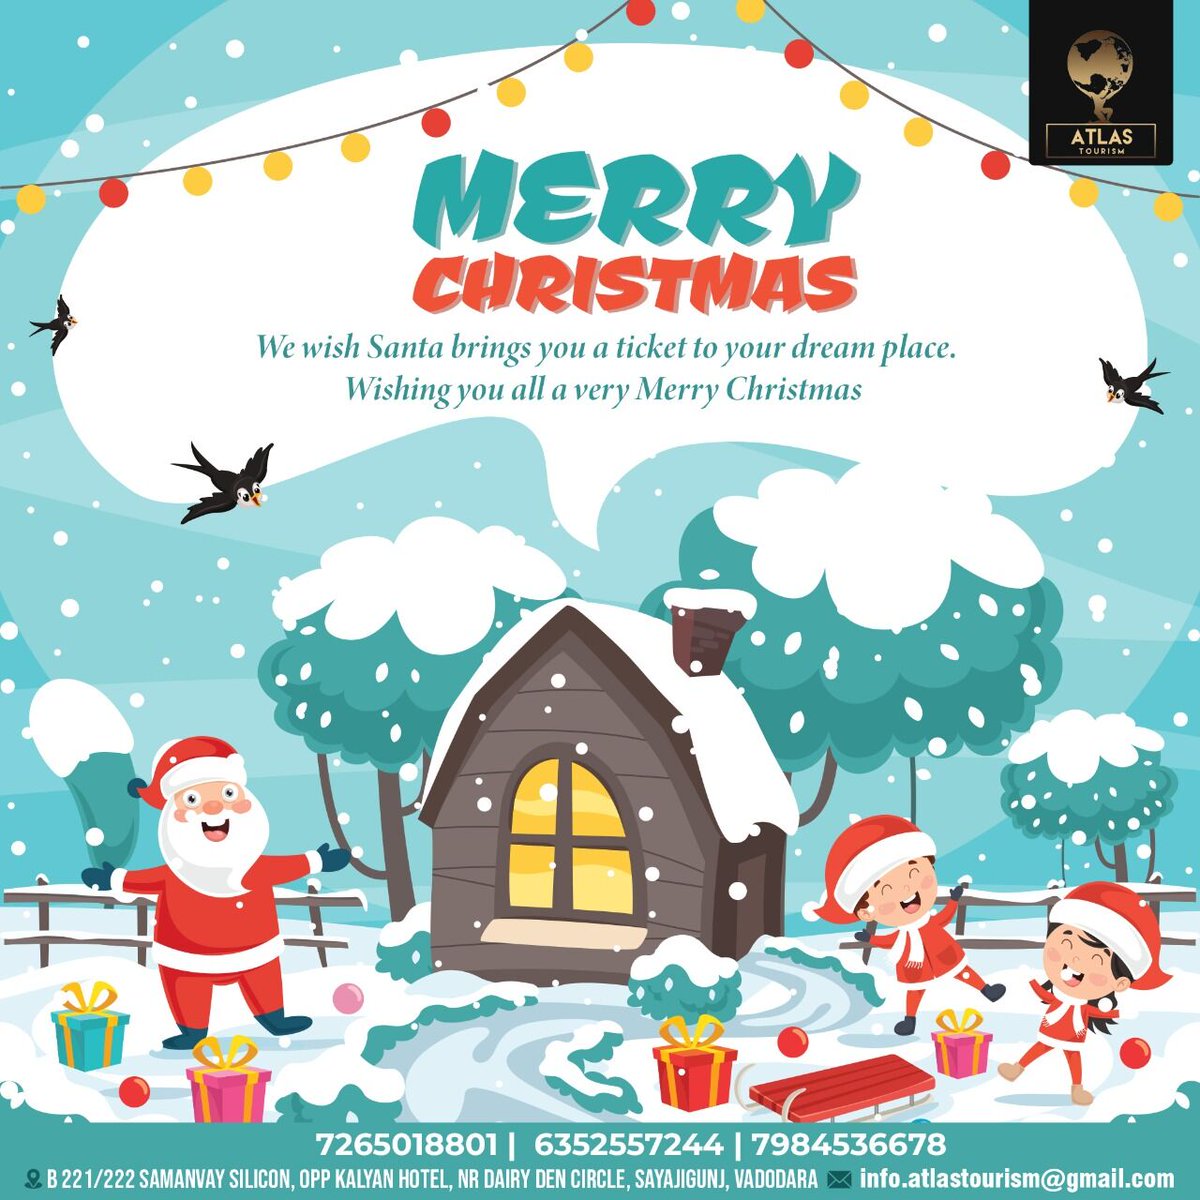 ⛪ We wish Santa brings you a ticket to your dream place 🎄

🎅🏻 𝐌𝐞𝐫𝐫𝐲 𝐂𝐡𝐫𝐢𝐬𝐭𝐦𝐚𝐬 🎁

📞 +91 72650 18801 | +91 63525 57244 | +91 79845 36678

#atlastourism #merrychristmas #xmas #trending #viral #explorepage #explore